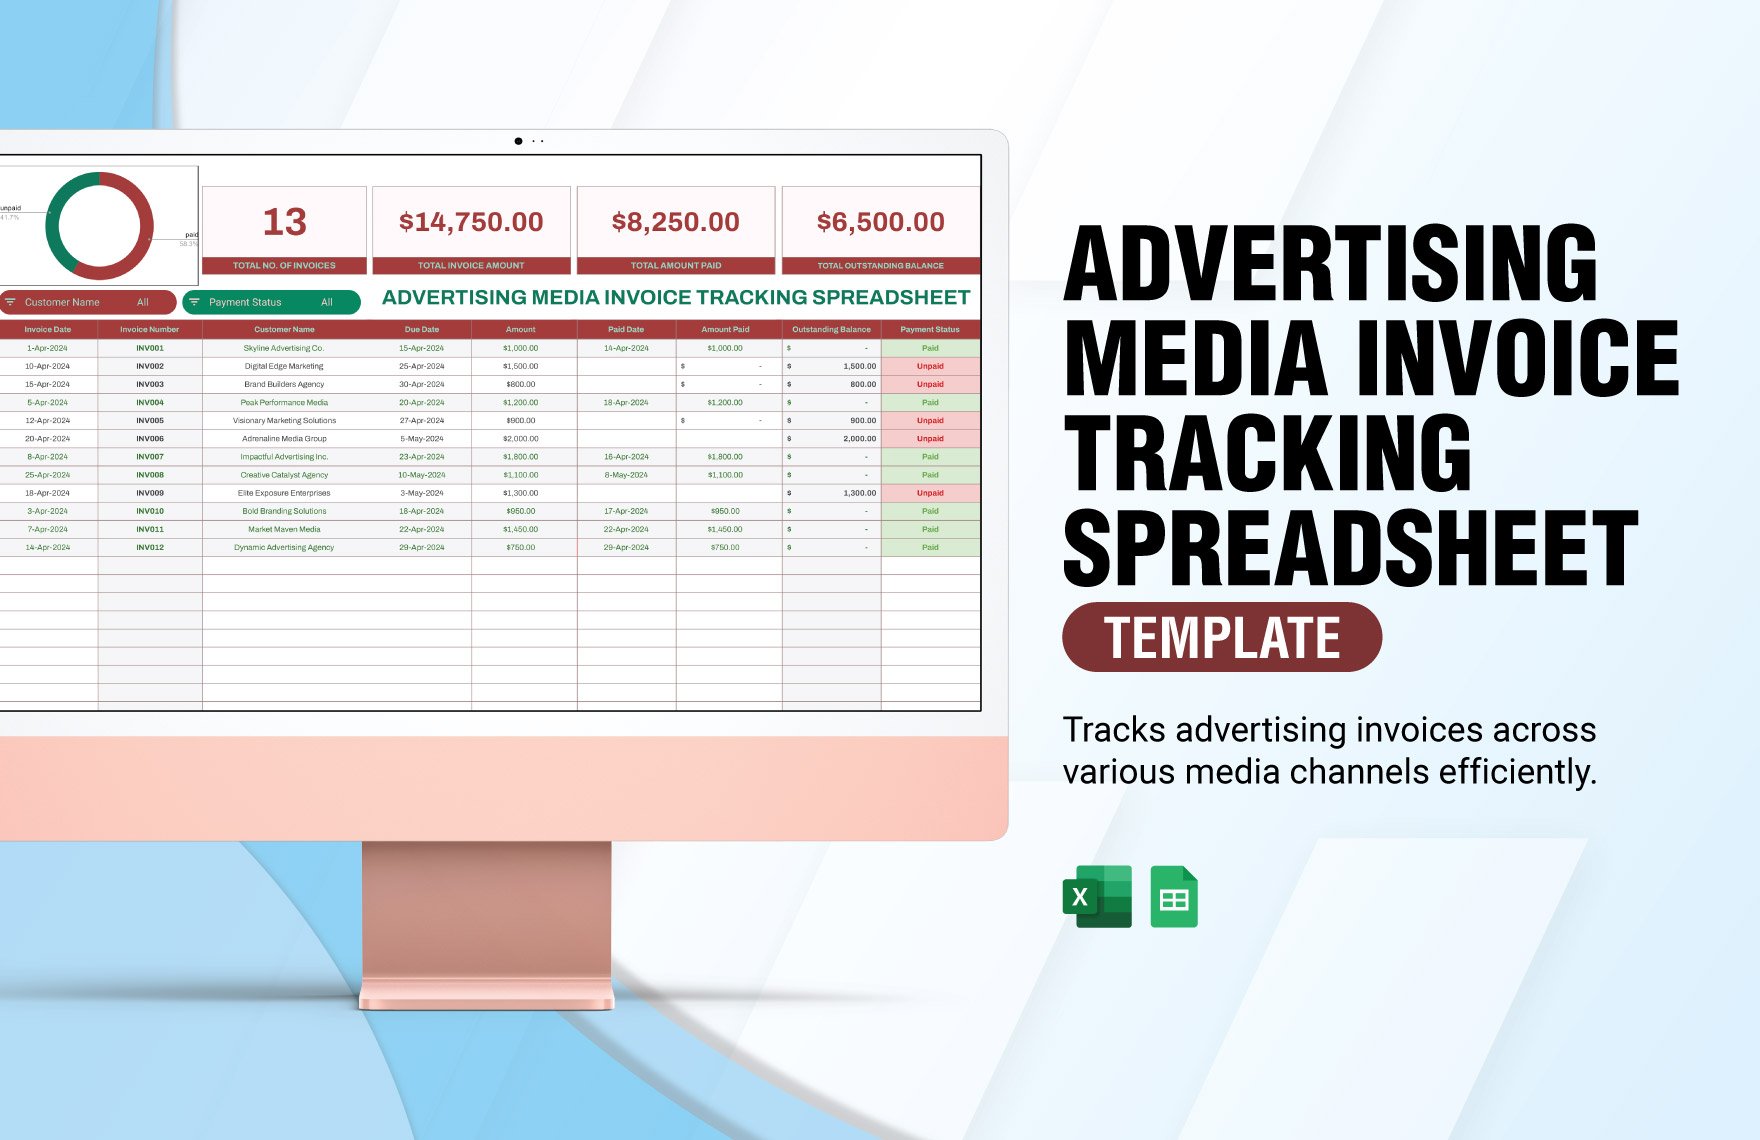 Advertising Media Invoice Tracking Spreadsheet Template in Excel, Google Sheets